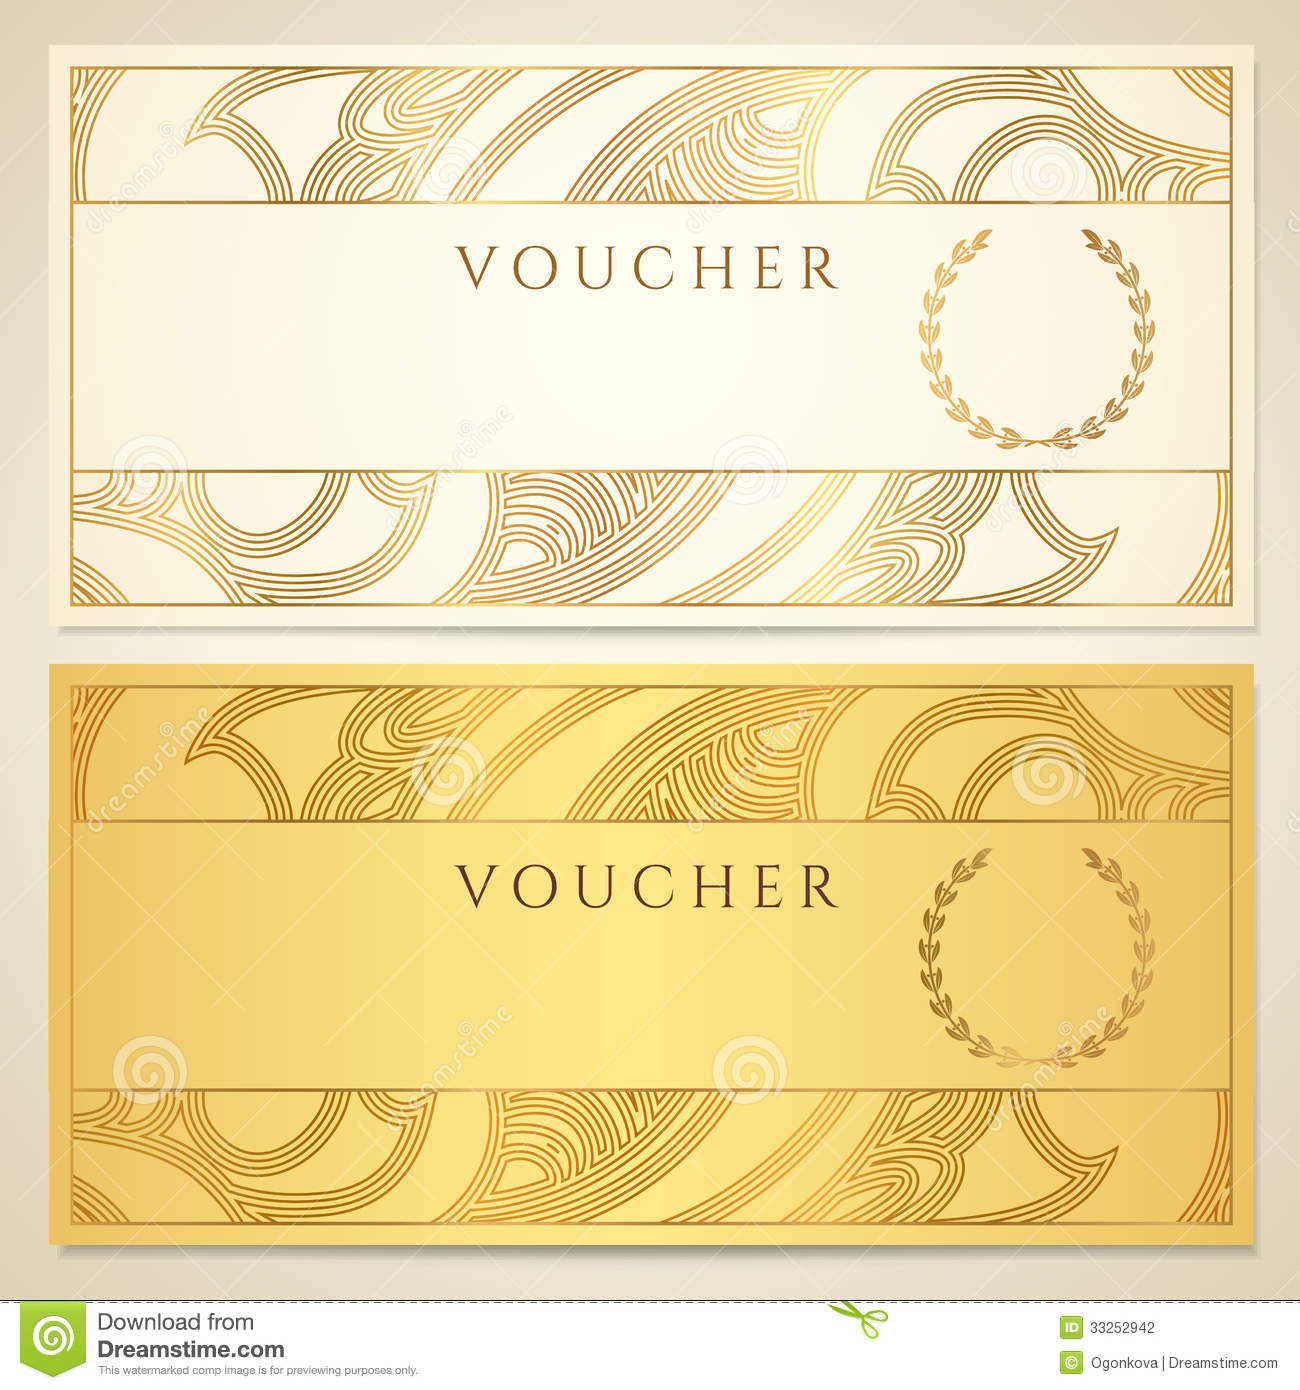 Voucher, Gift Certificate, Coupon Template. Stock Photo Image 